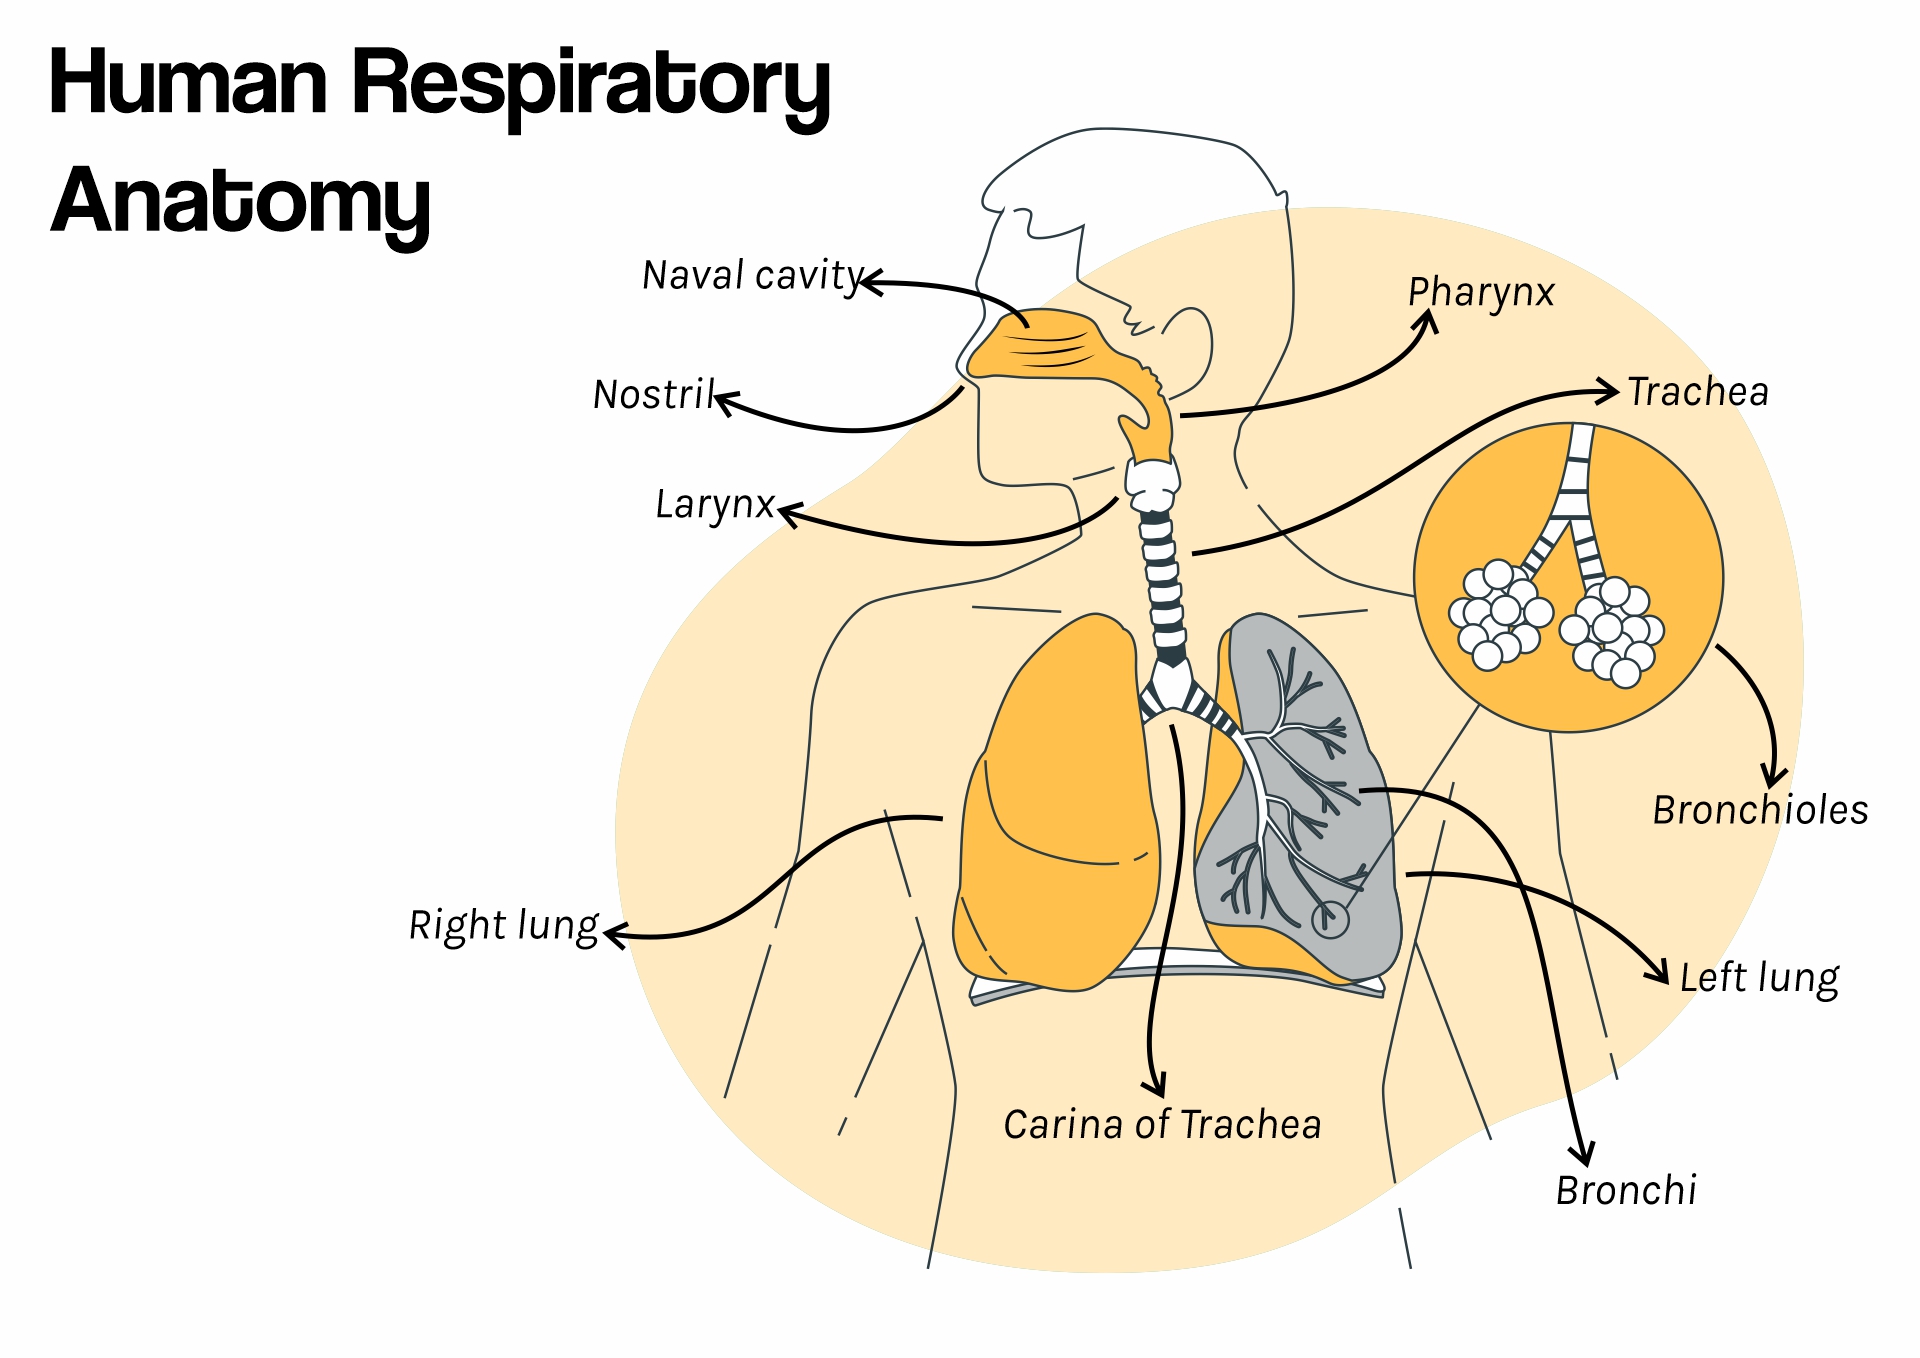 Parts of the Human Respiratory System